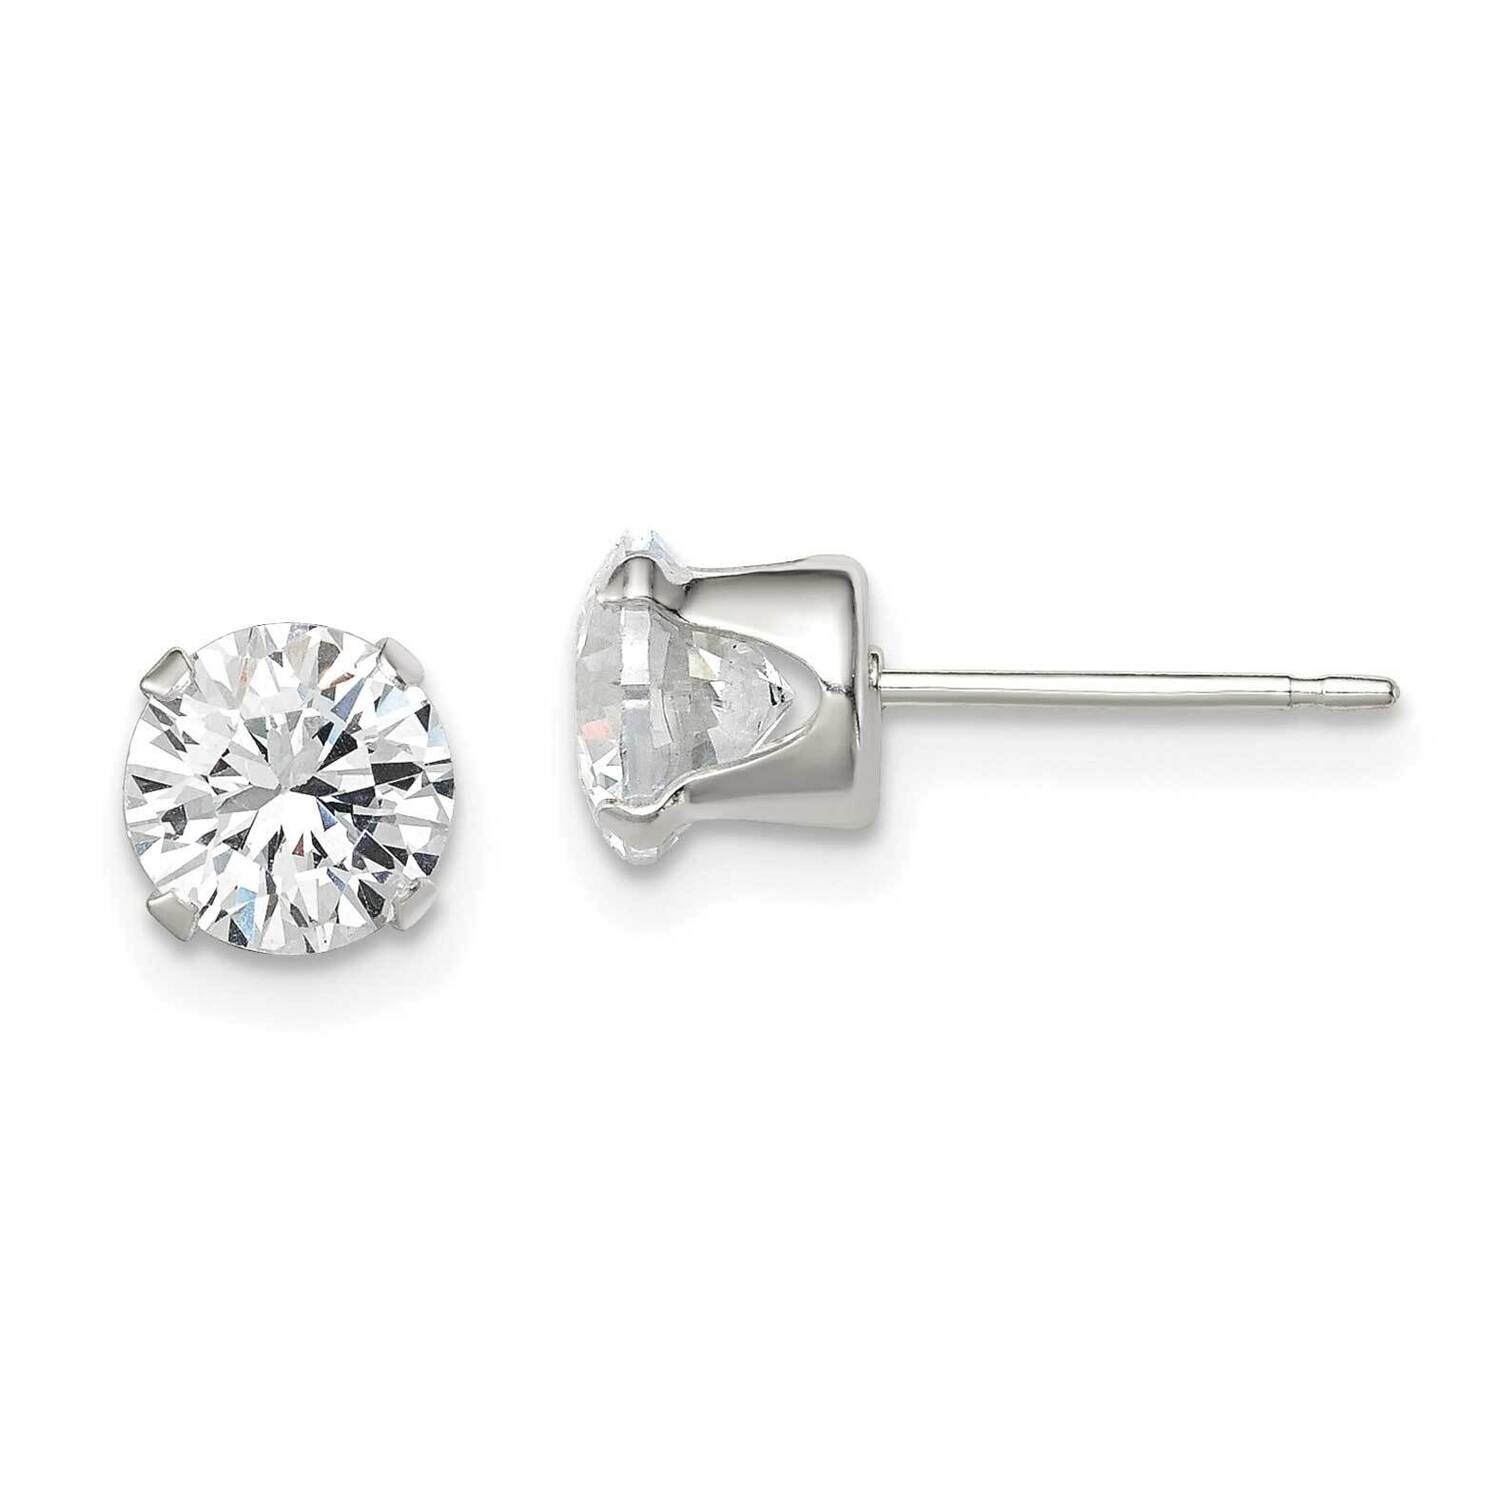 6mm Round Snap Set Cubic Zirconia Stud Earrings Sterling Silver QE1005